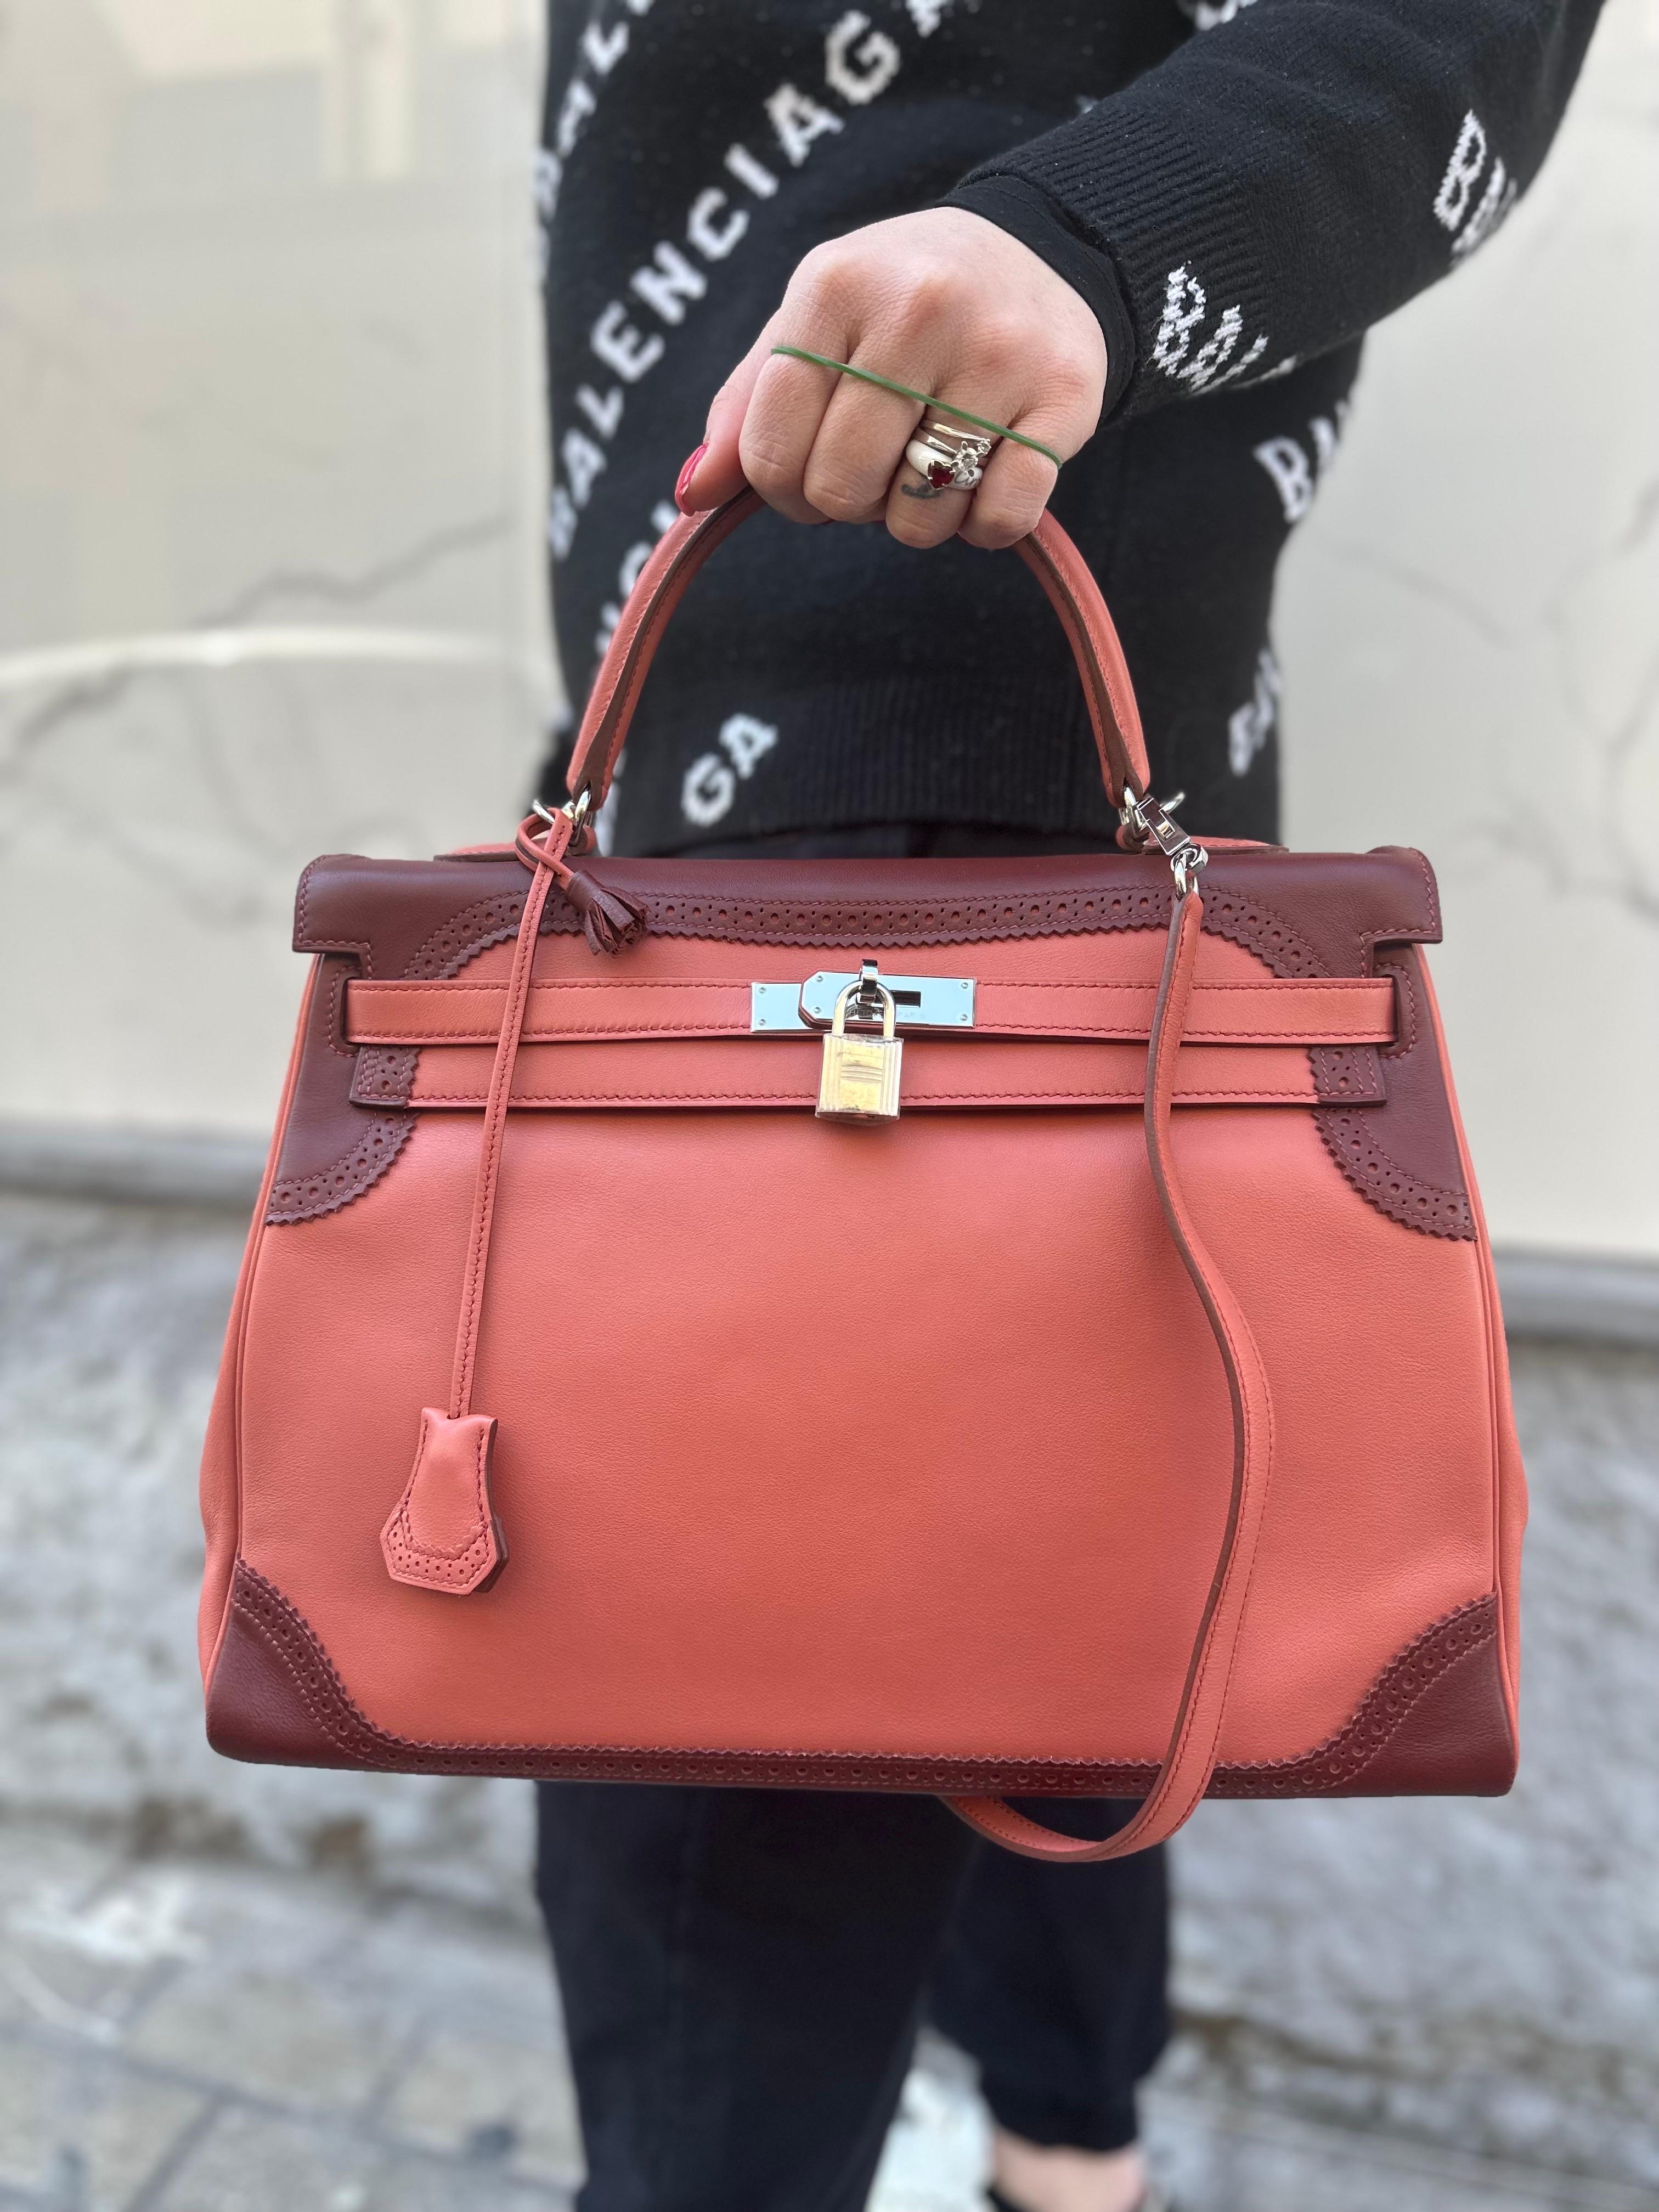 2012 Hermès Kelly 35 Ghillies Evercalf Rose Texas/Rouge H For Sale 10